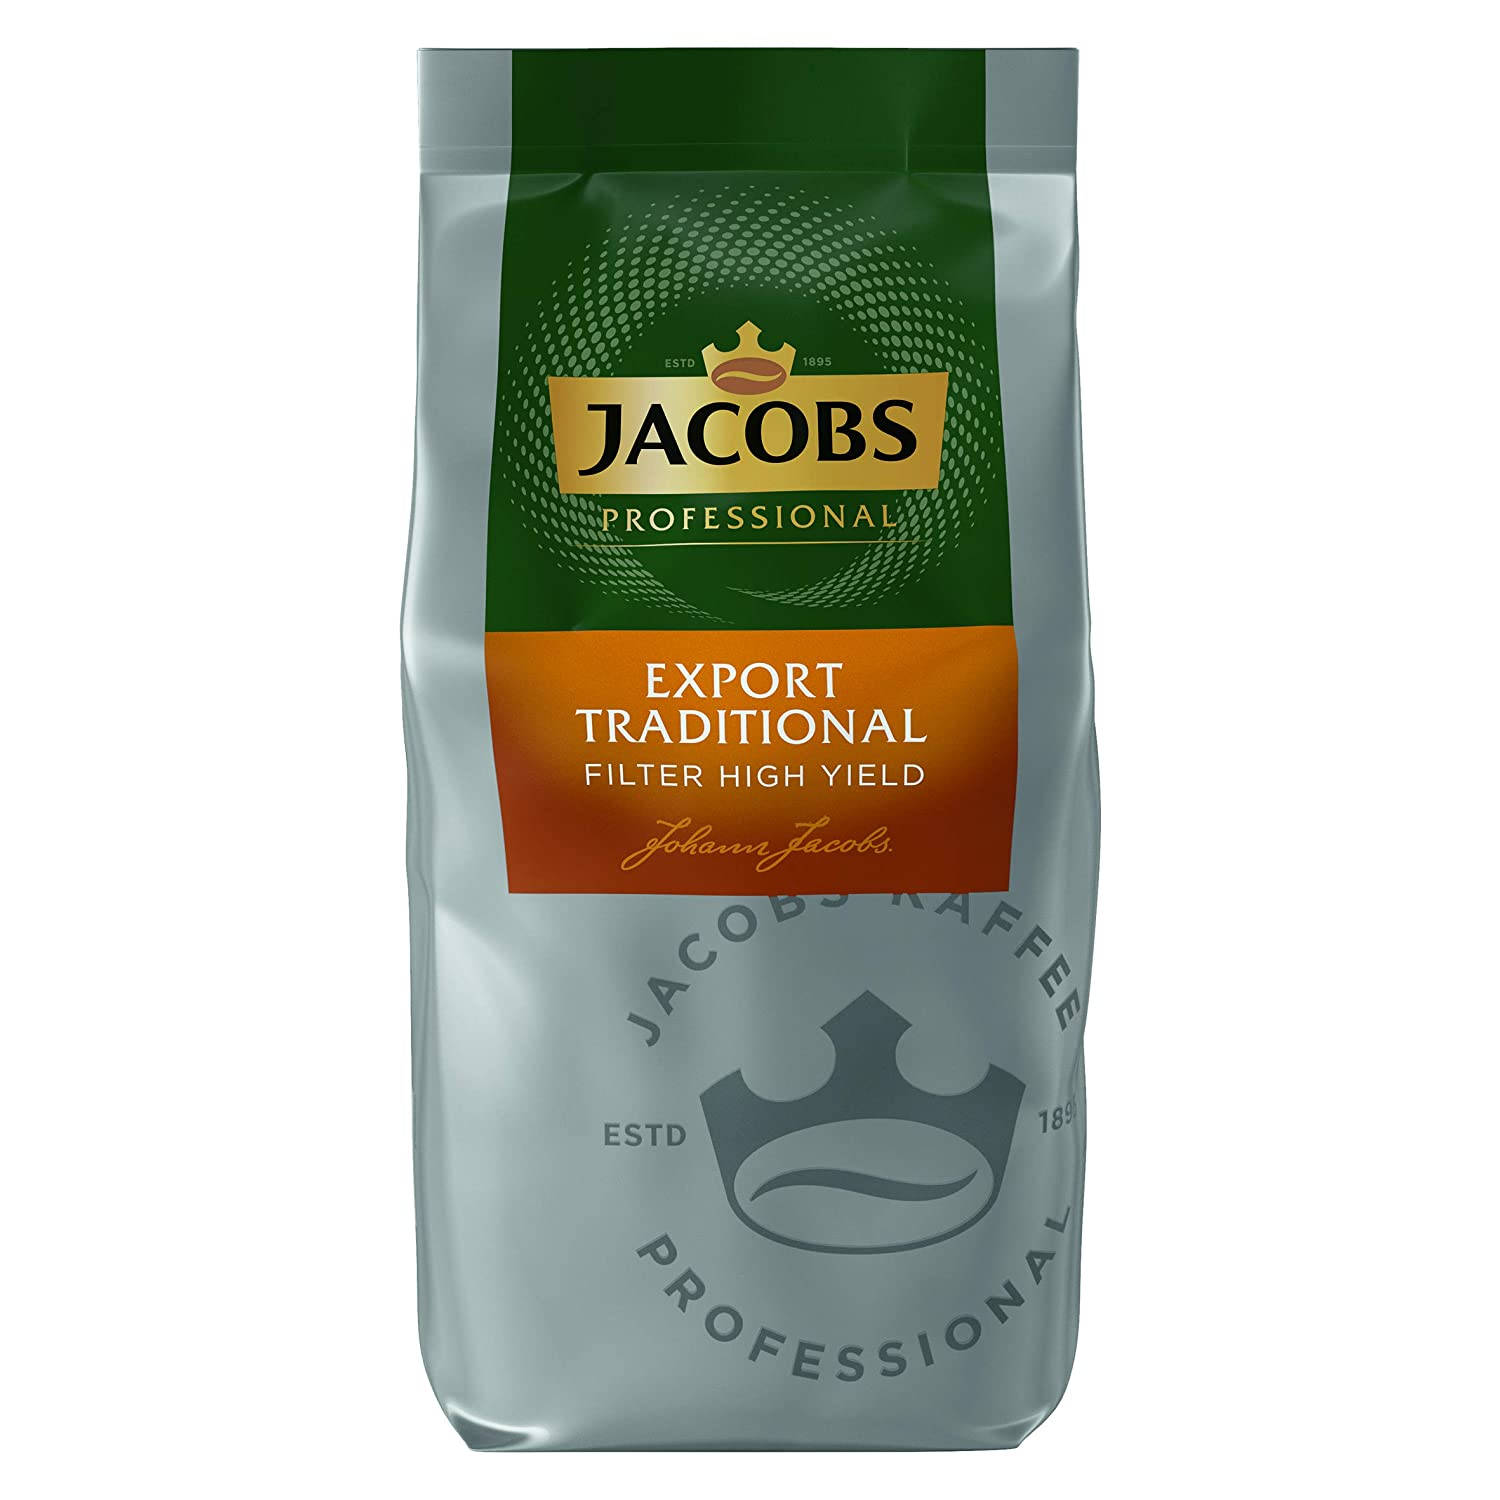 French JACOBS Professional Yield High Traditional 2x800g Press) Filterkaffee (Filtermaschinen, Export